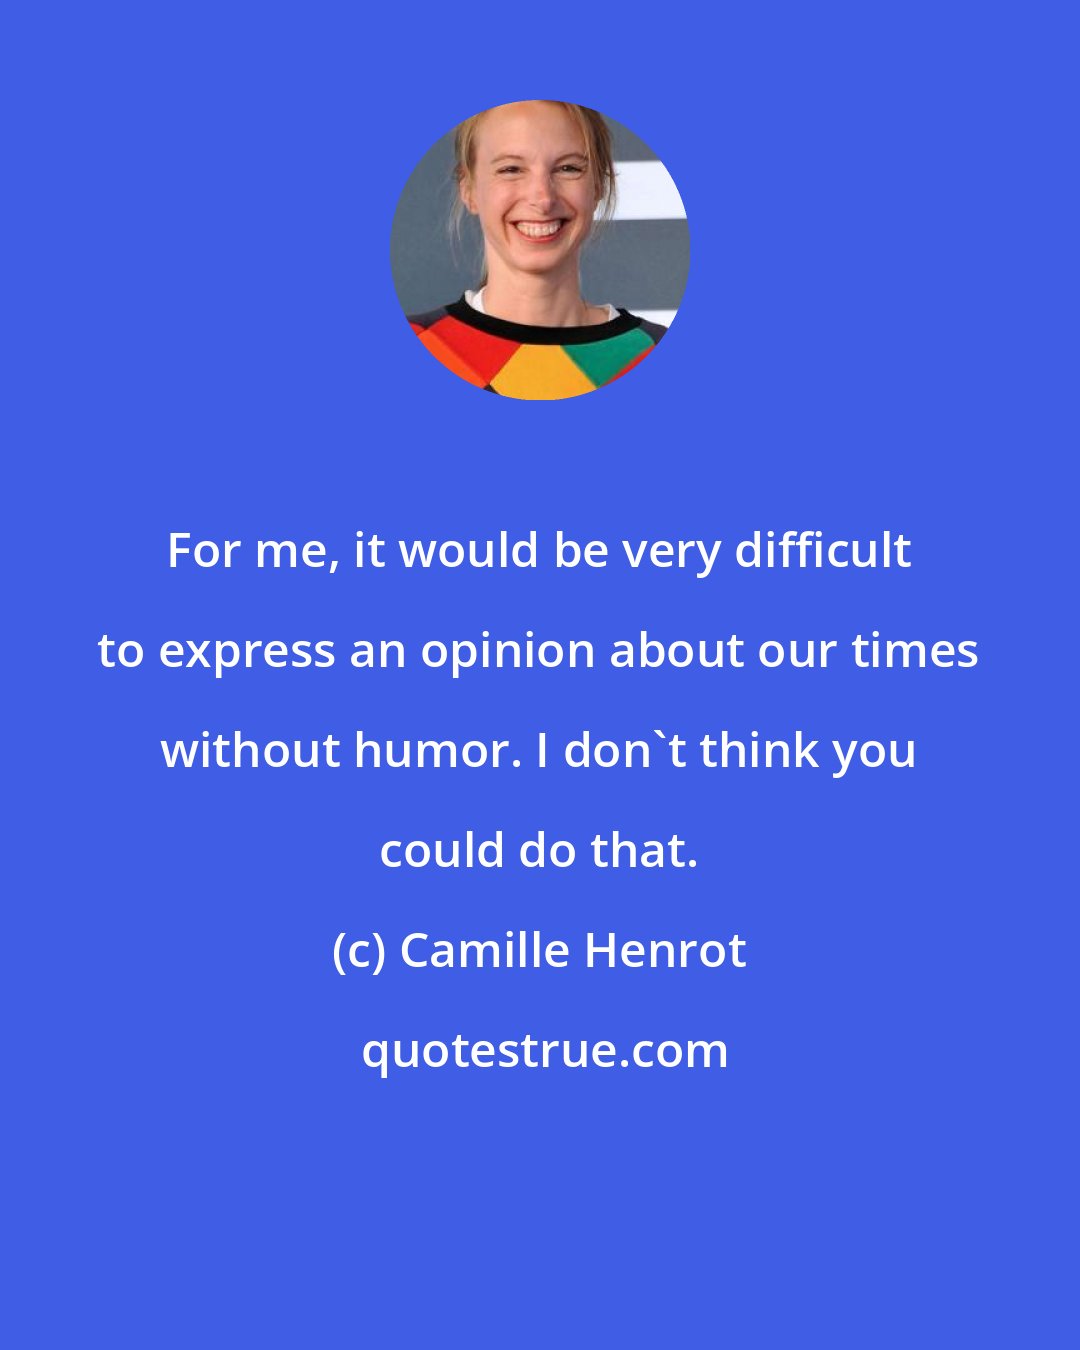 Camille Henrot: For me, it would be very difficult to express an opinion about our times without humor. I don't think you could do that.